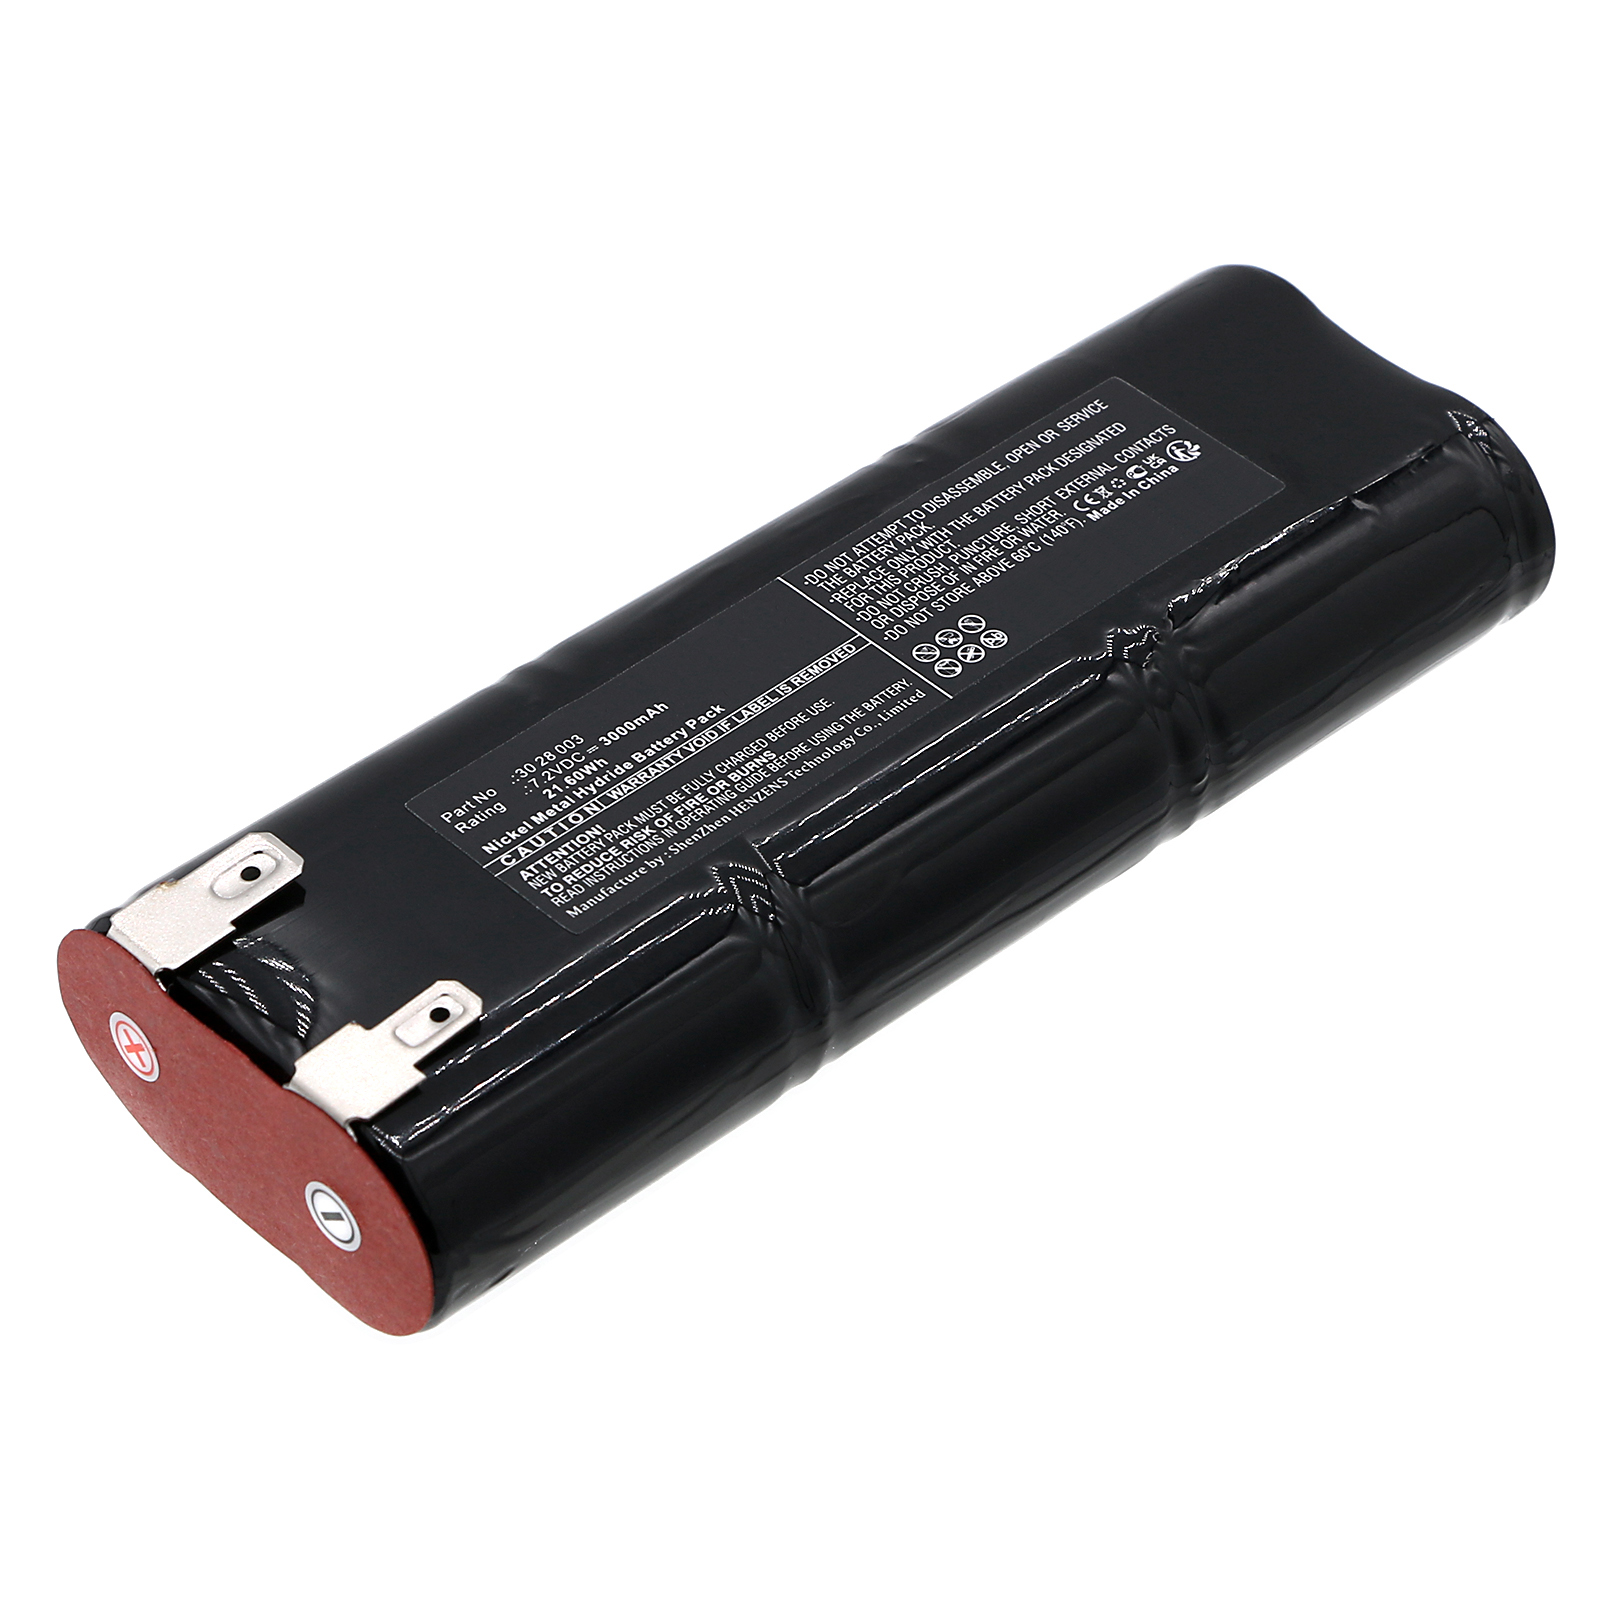 Batteries for FakirVacuum Cleaner